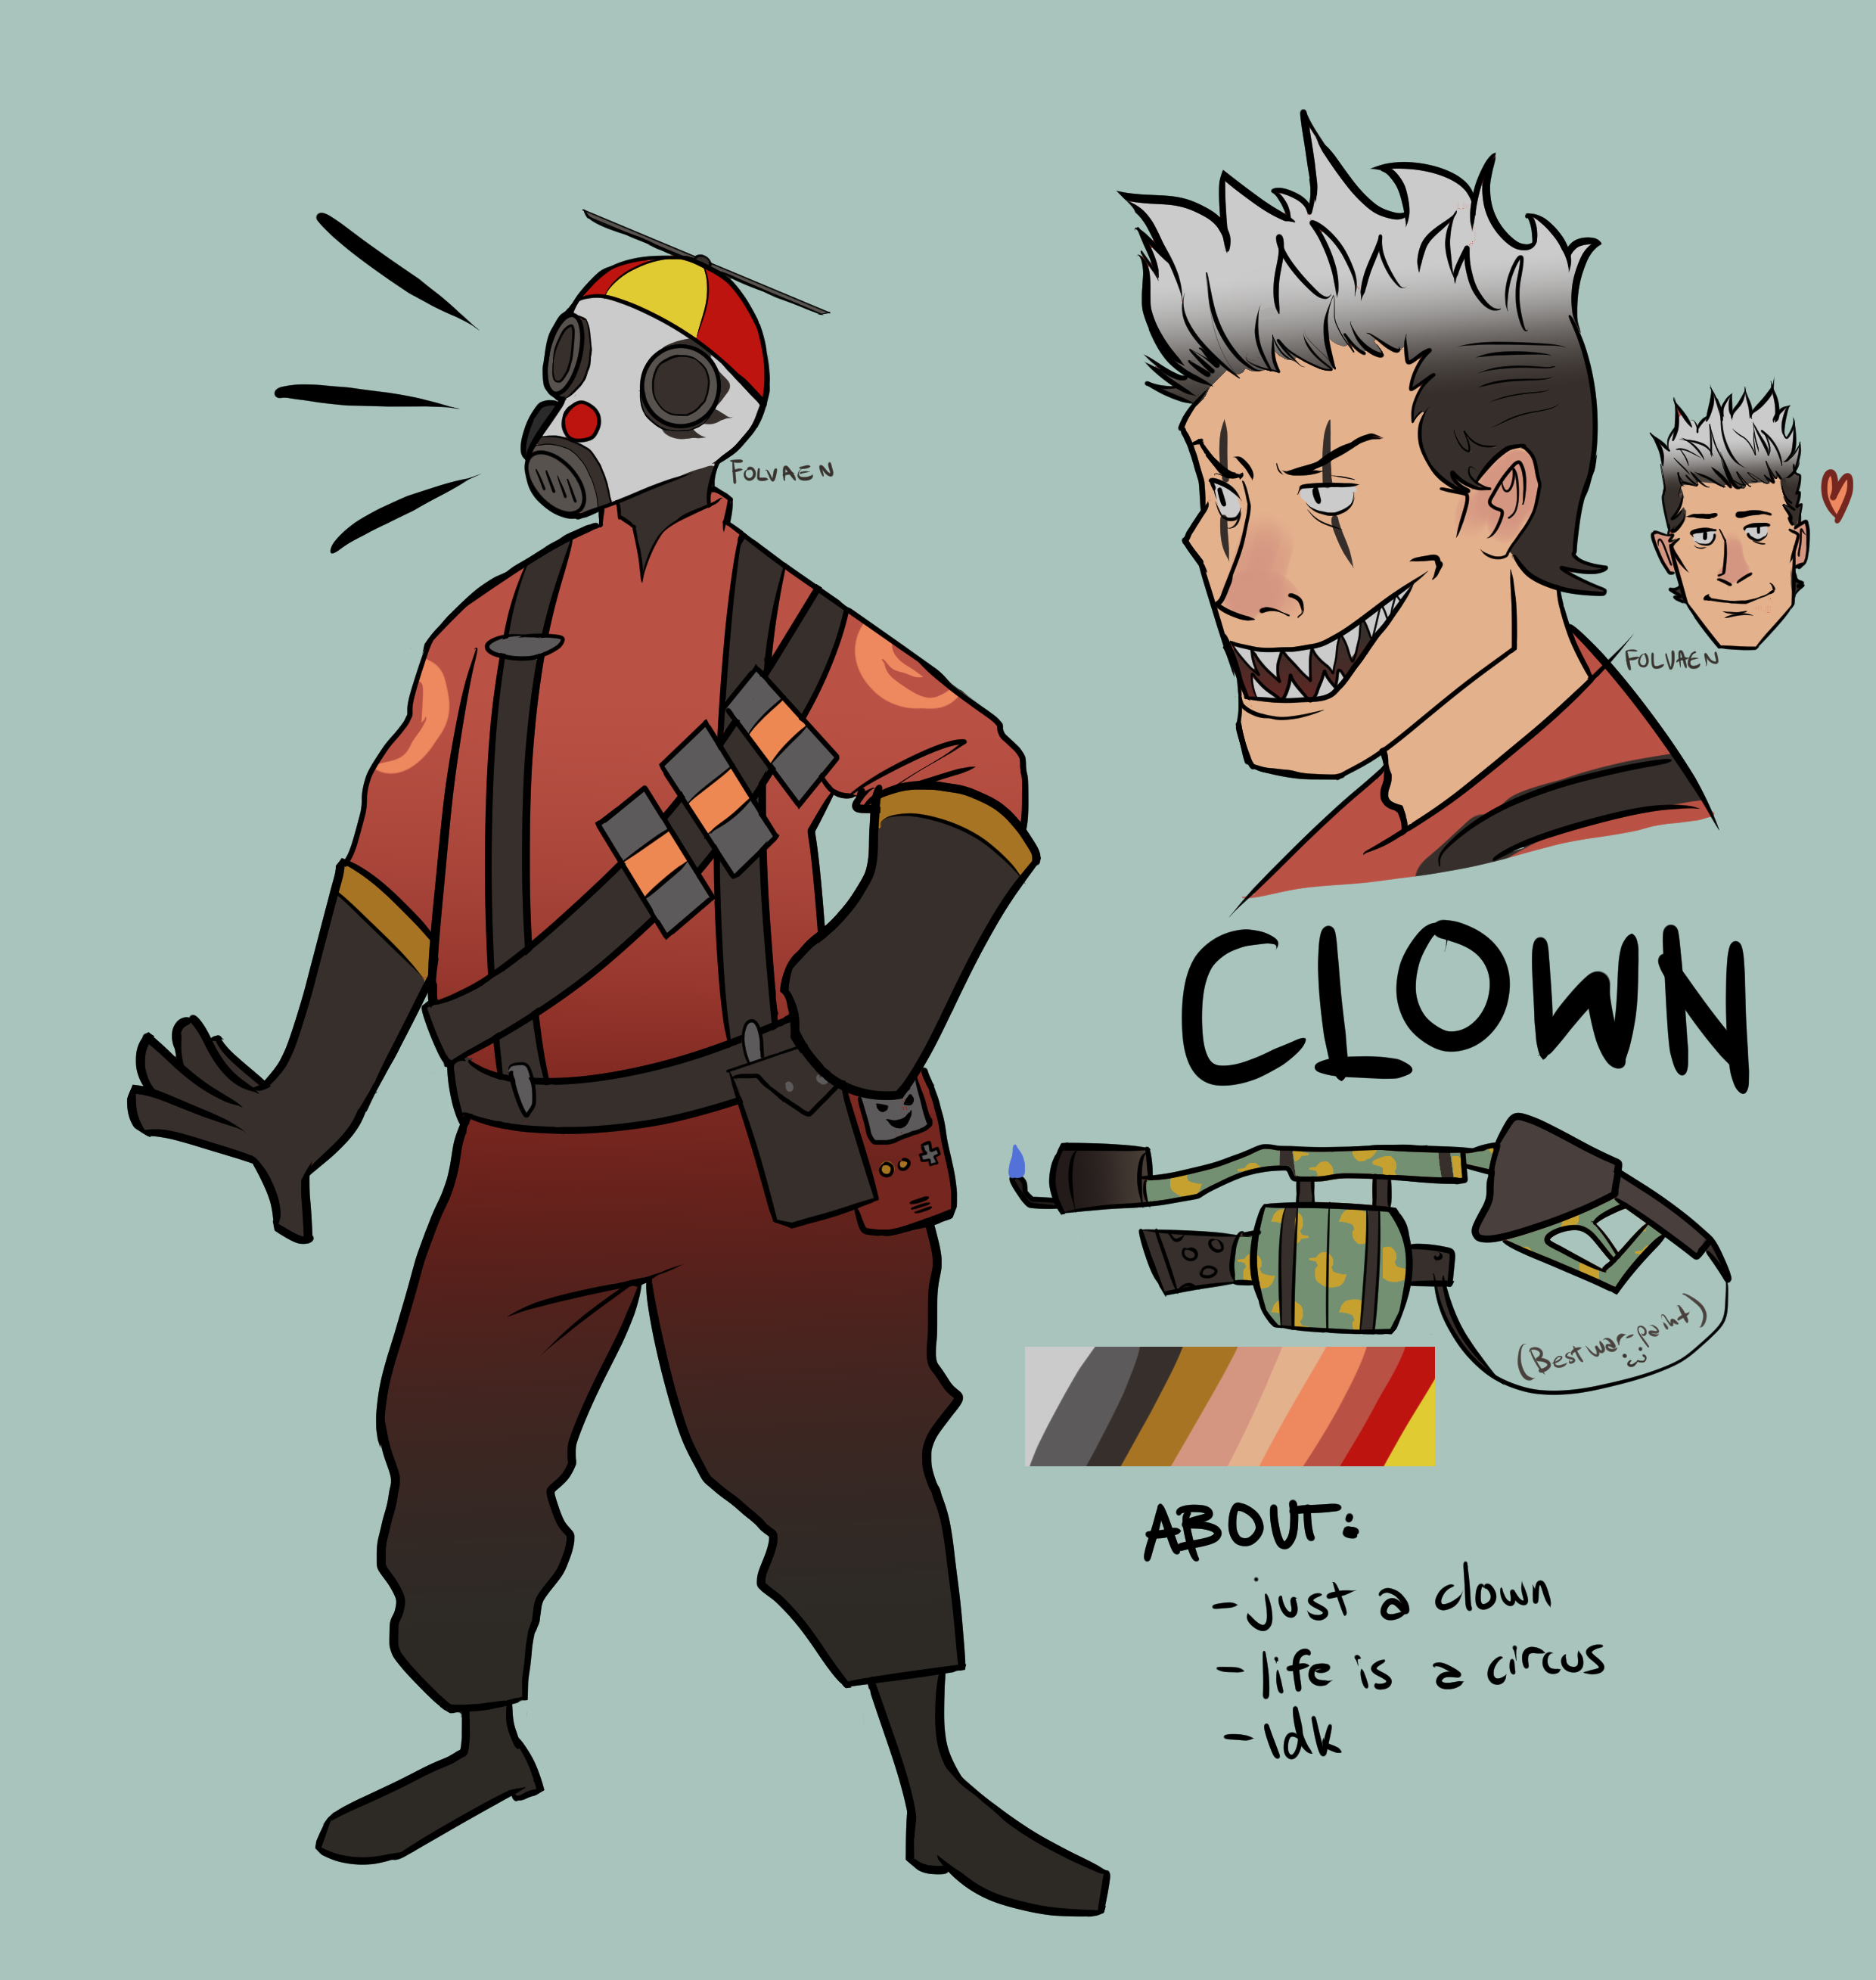 neavlof 🌙 on Twitter: "ok my loadout is an oc i just wanted to design a pyro without a mask. so here's mine. #TF2 https://t.co/ap3QzWvYLp" / Twitter